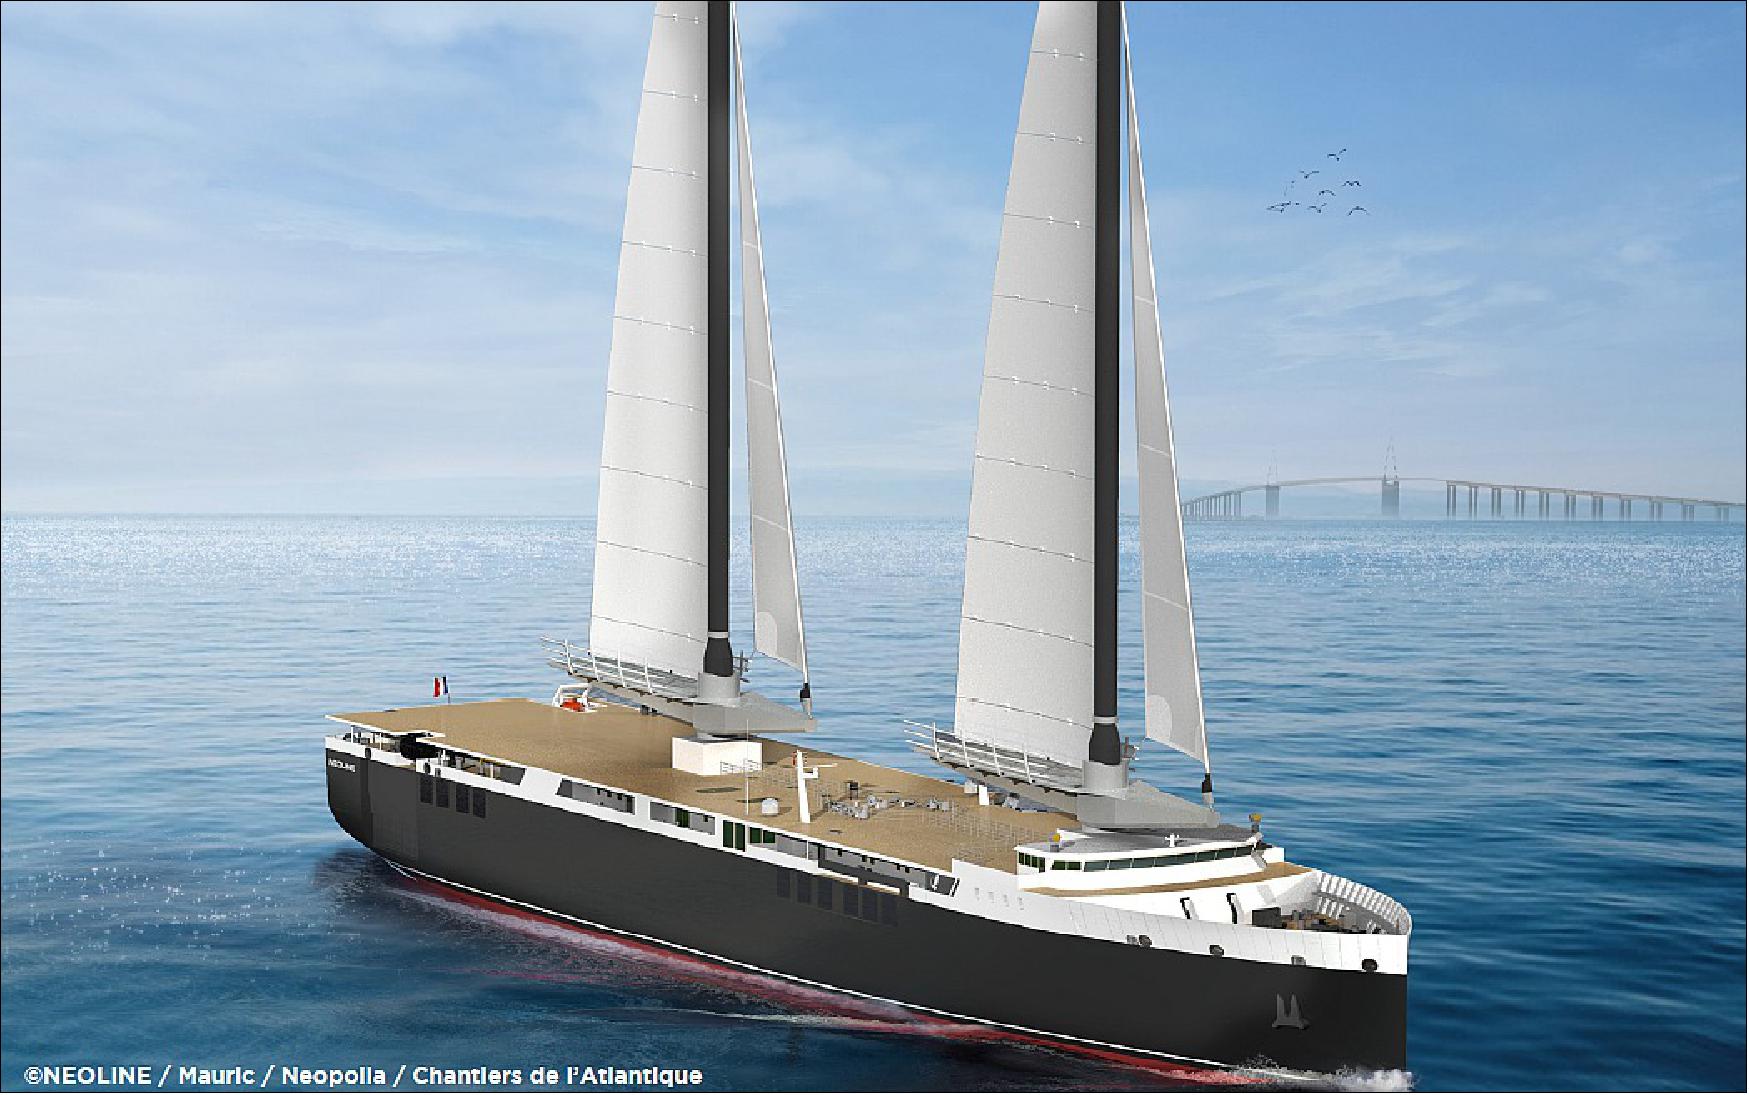 Figure 36: Shipping company Neoline is to equip its latest vessel, a 136-meter wind-powered merchant ship, with a Solid Sail solution from Chantiers de l’Atlantique to slash fuel consumption (image credit: Neoline)